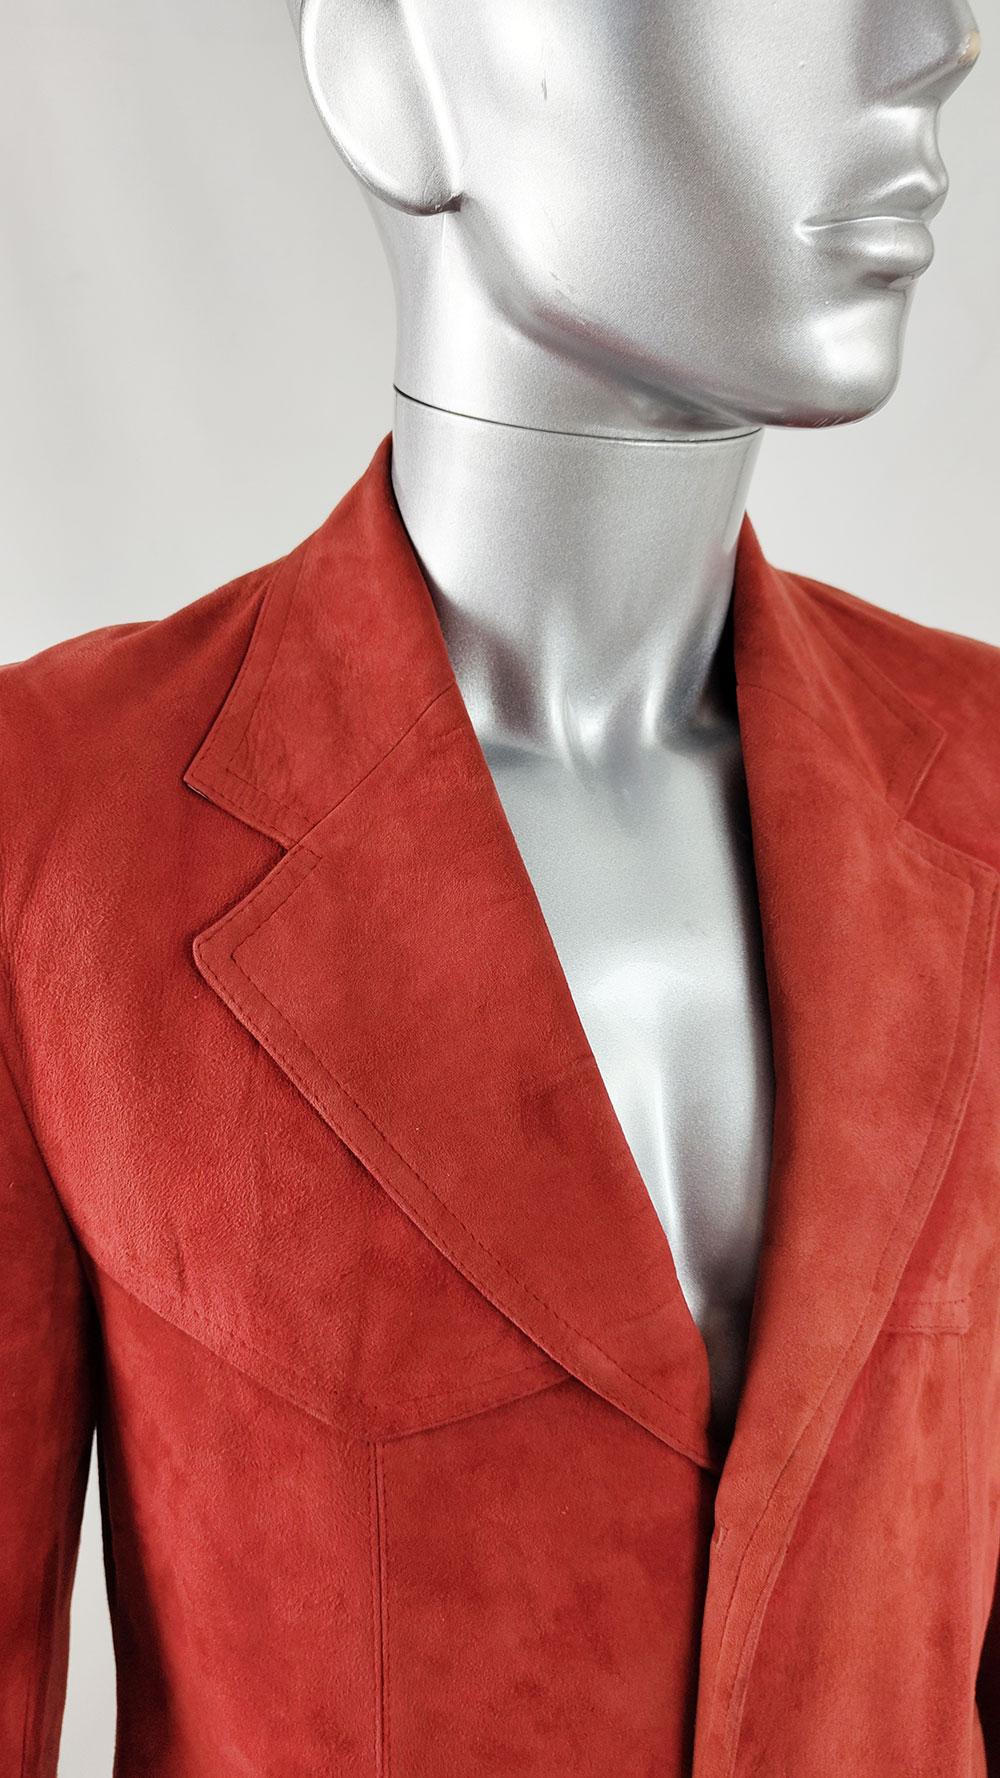 Vintage Mens Red Lambskin Suede Blazer 70s Sport Coat Jacket, 1970s In Fair Condition For Sale In Doncaster, South Yorkshire